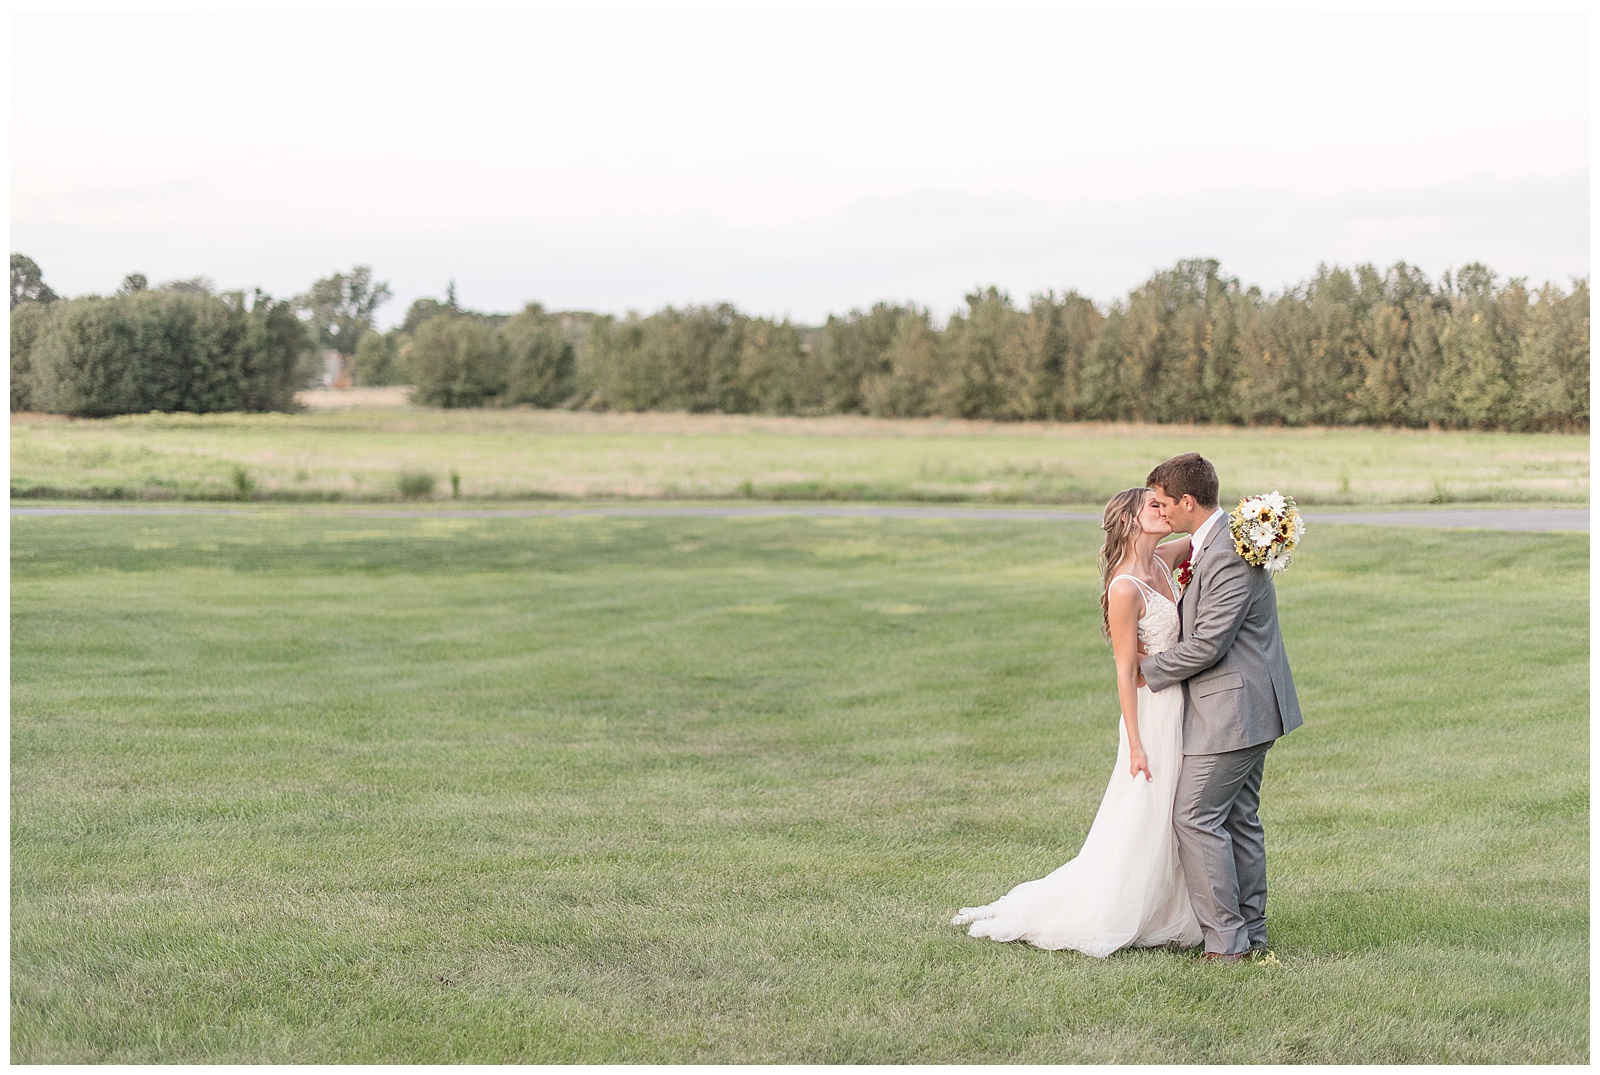 husband and wife kissing in open grass field